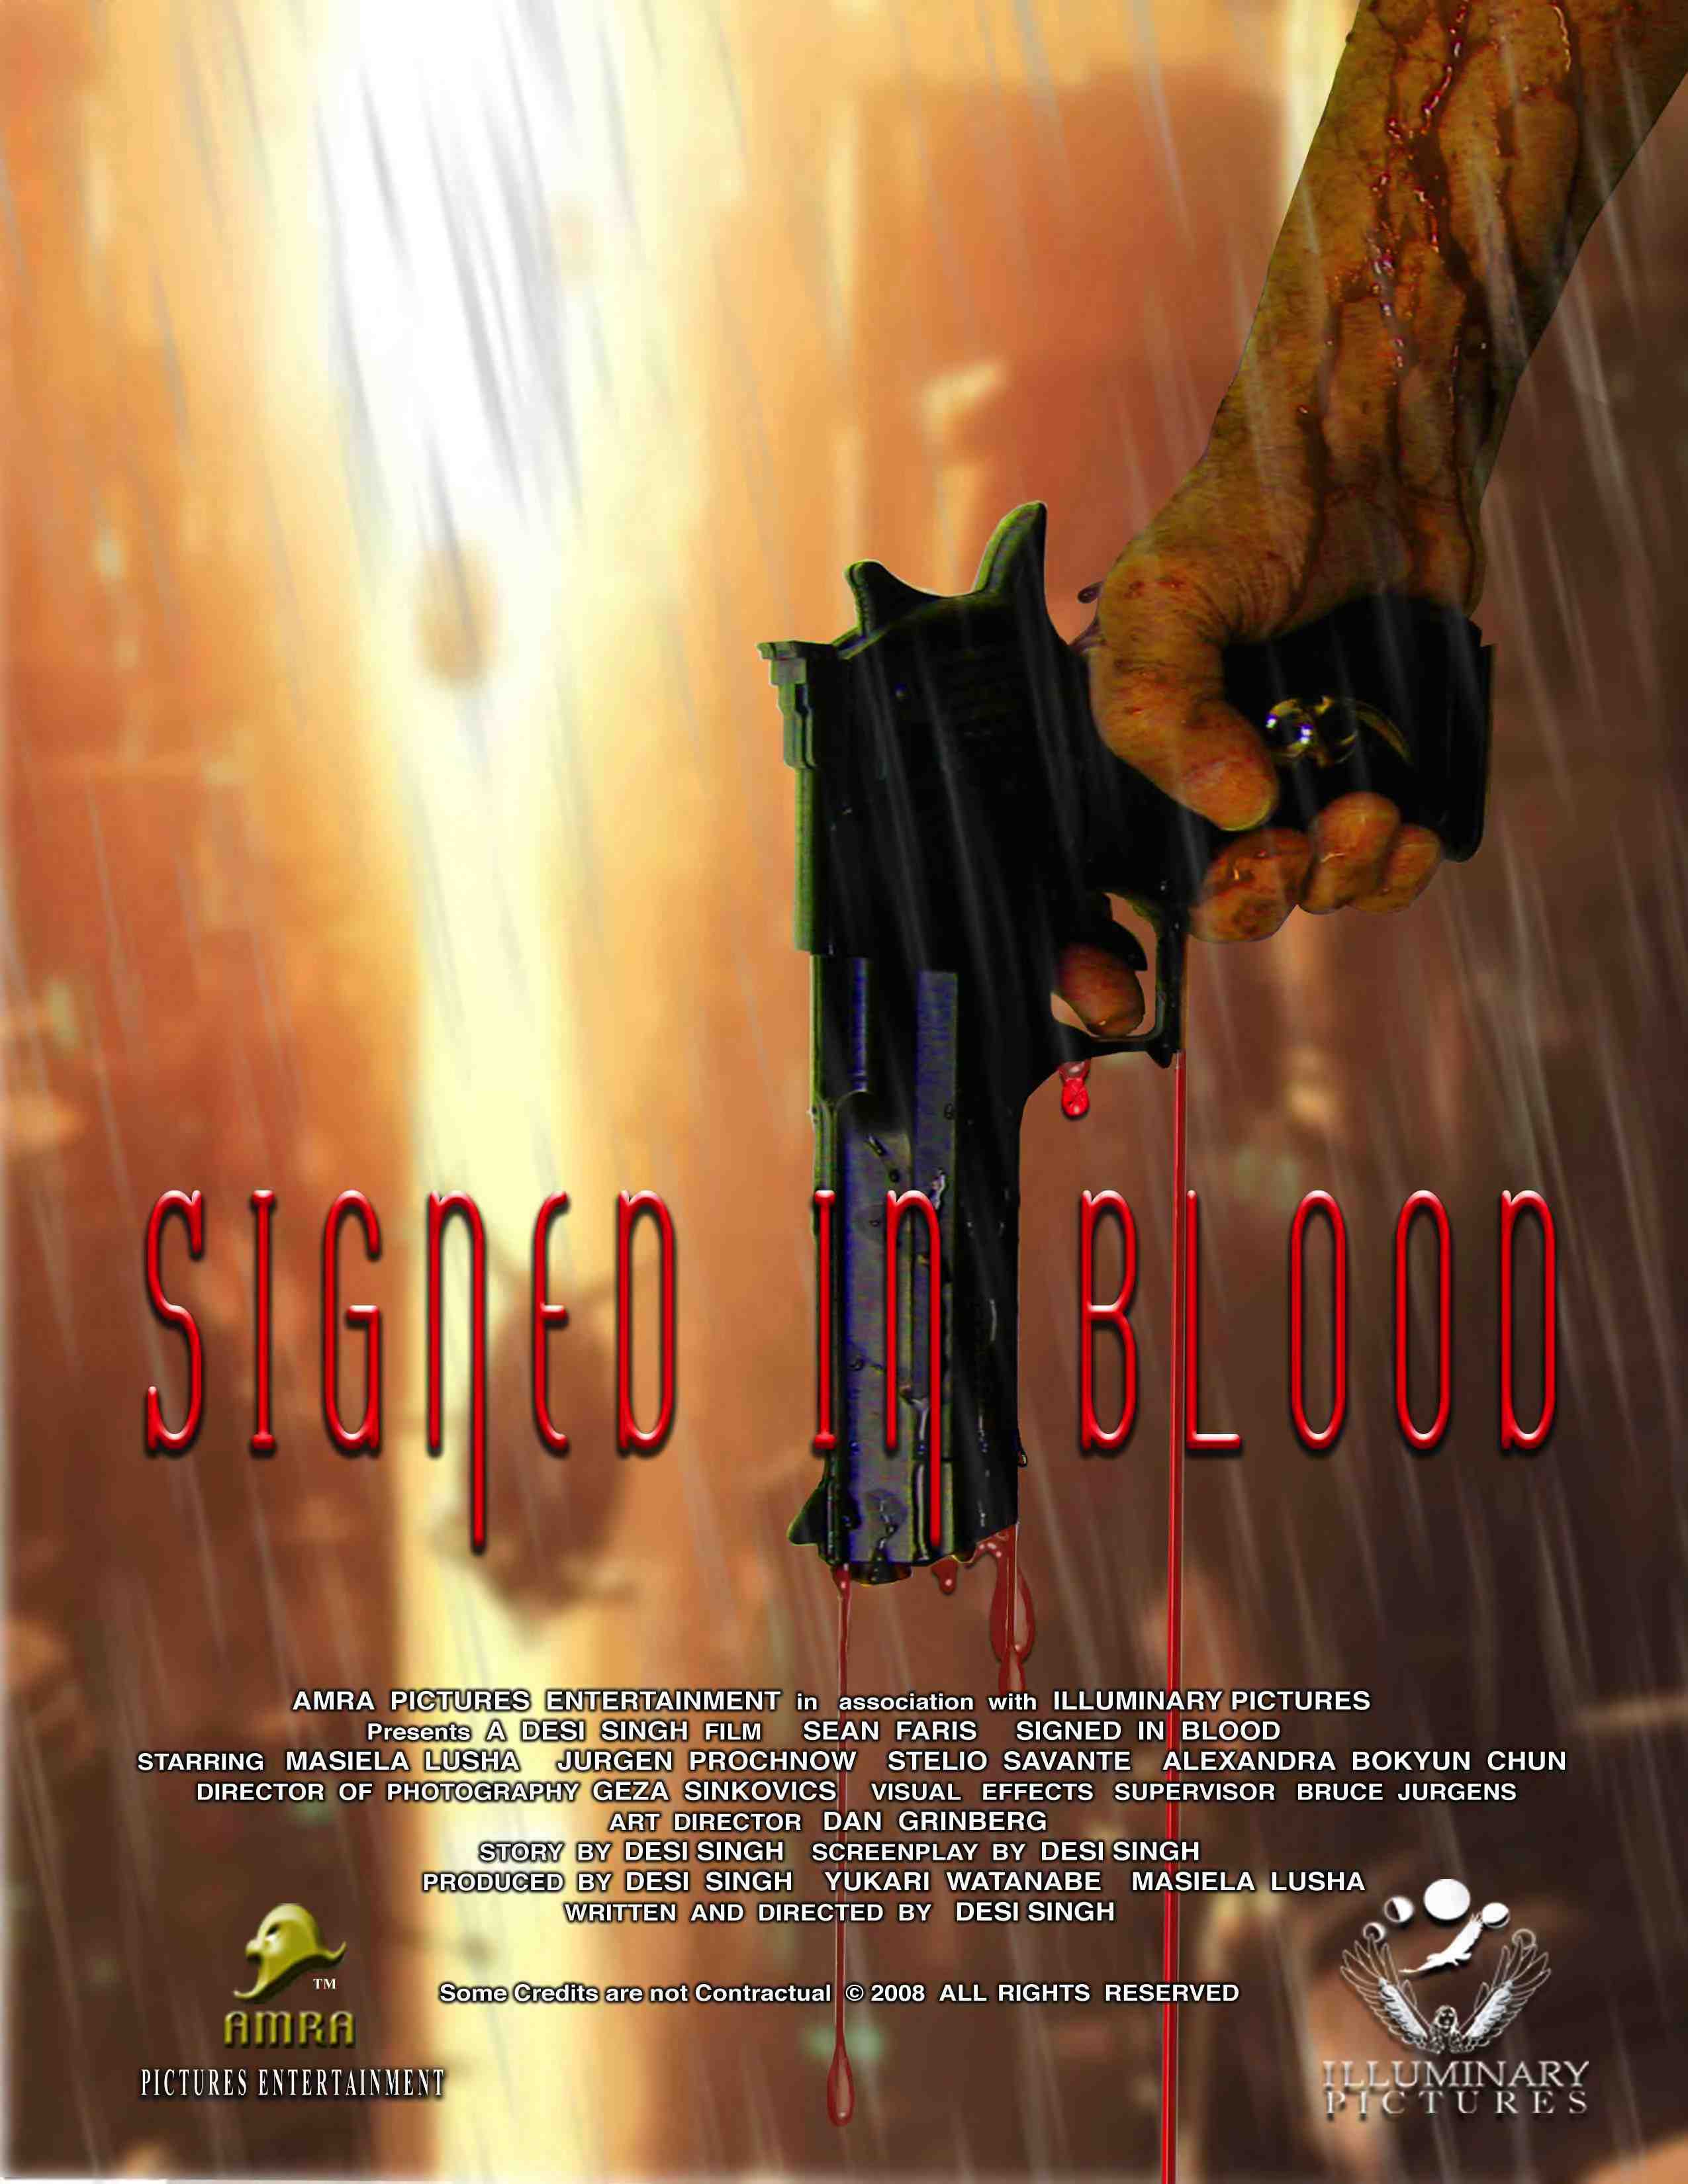 Signed In Blood Concept Poster